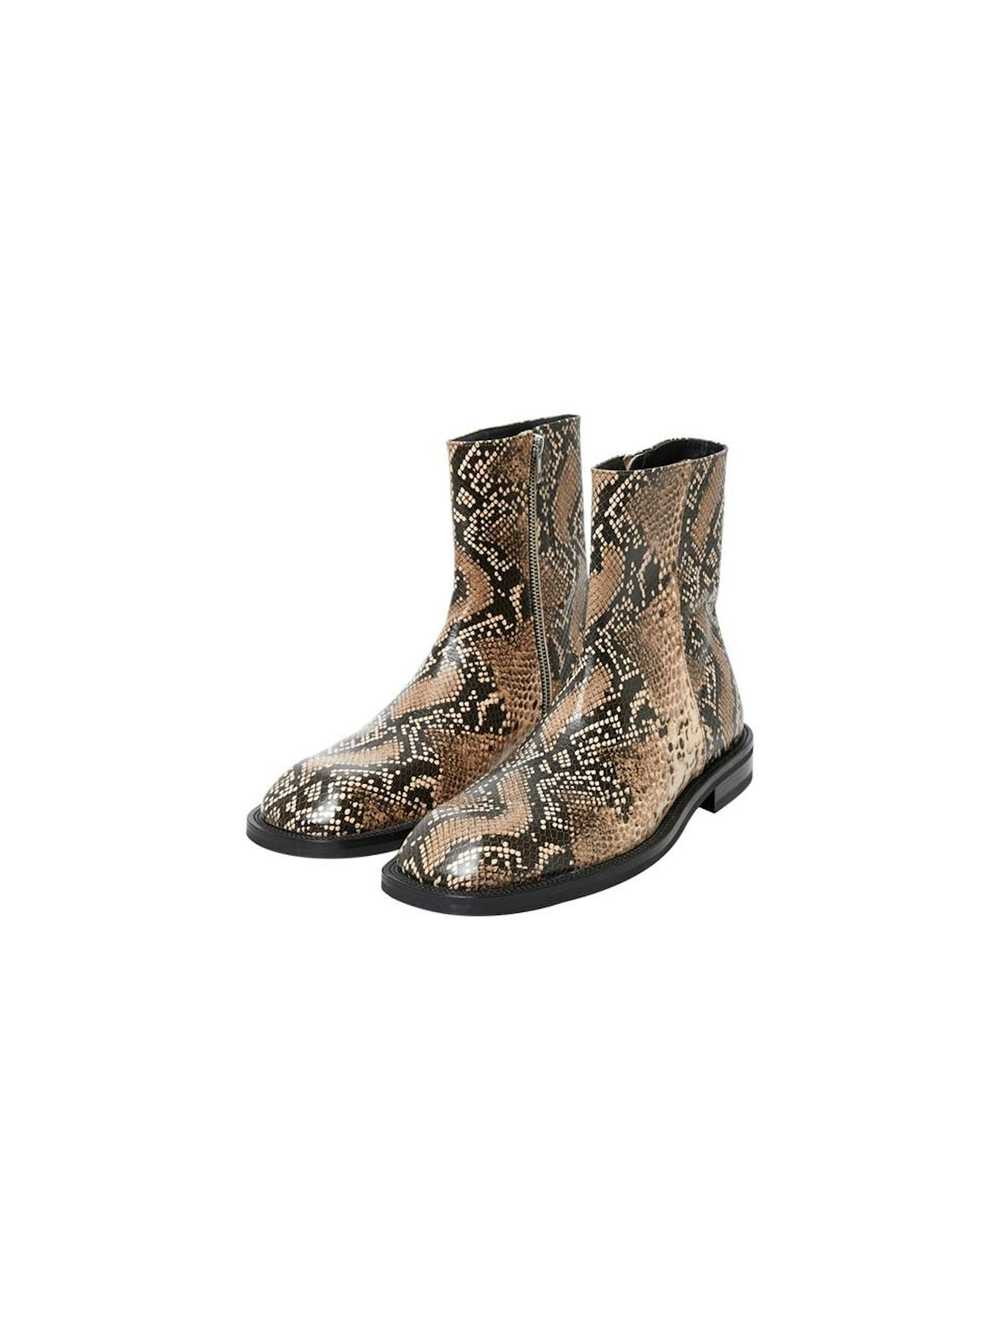 Andersson Bell Square Toe Python Boots - image 1